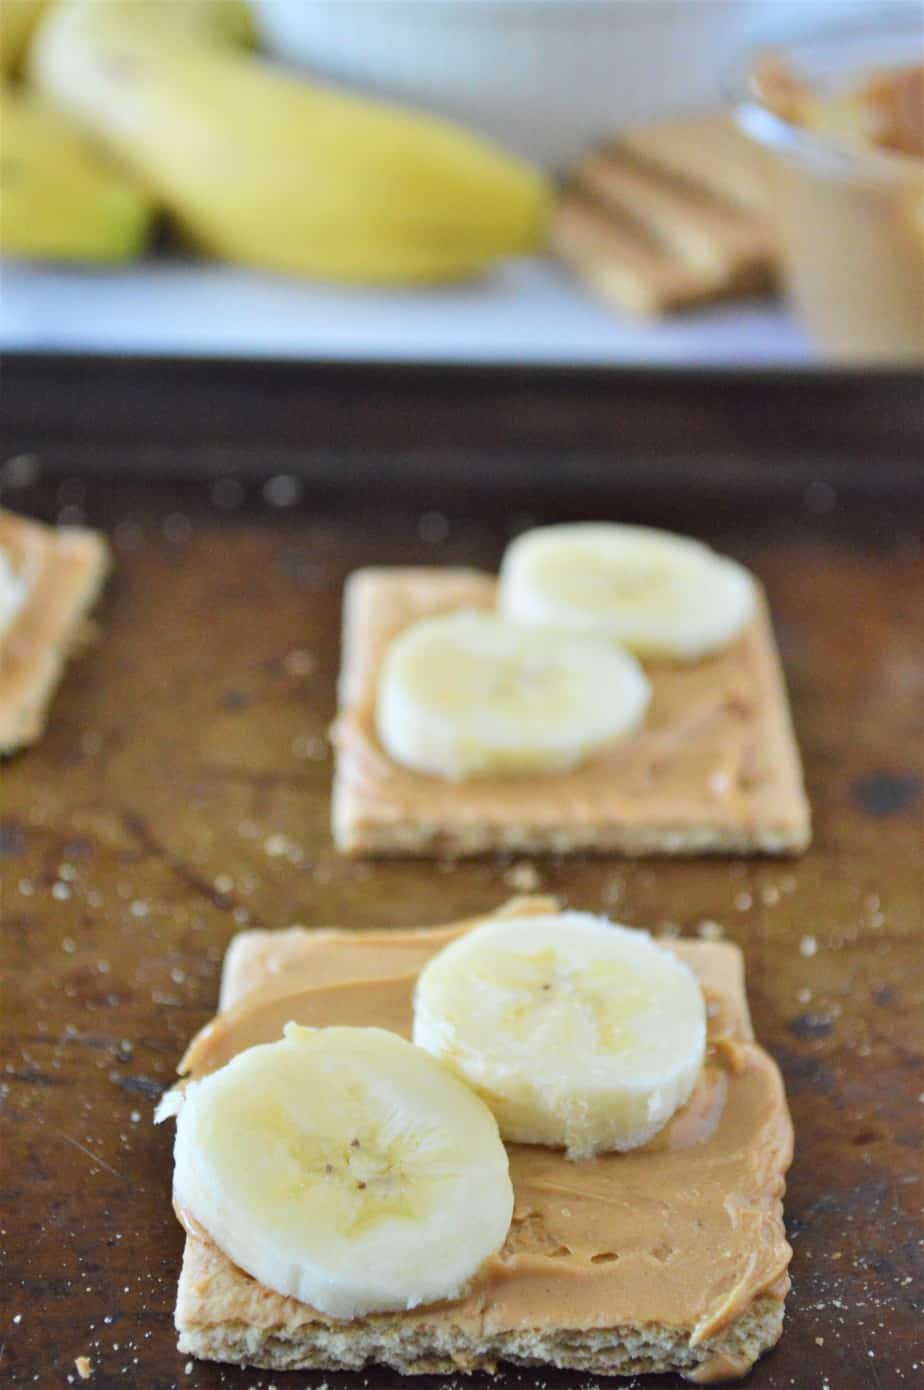 graham crackers spread with peanut butter and topped with sliced bananas on cookie sheet